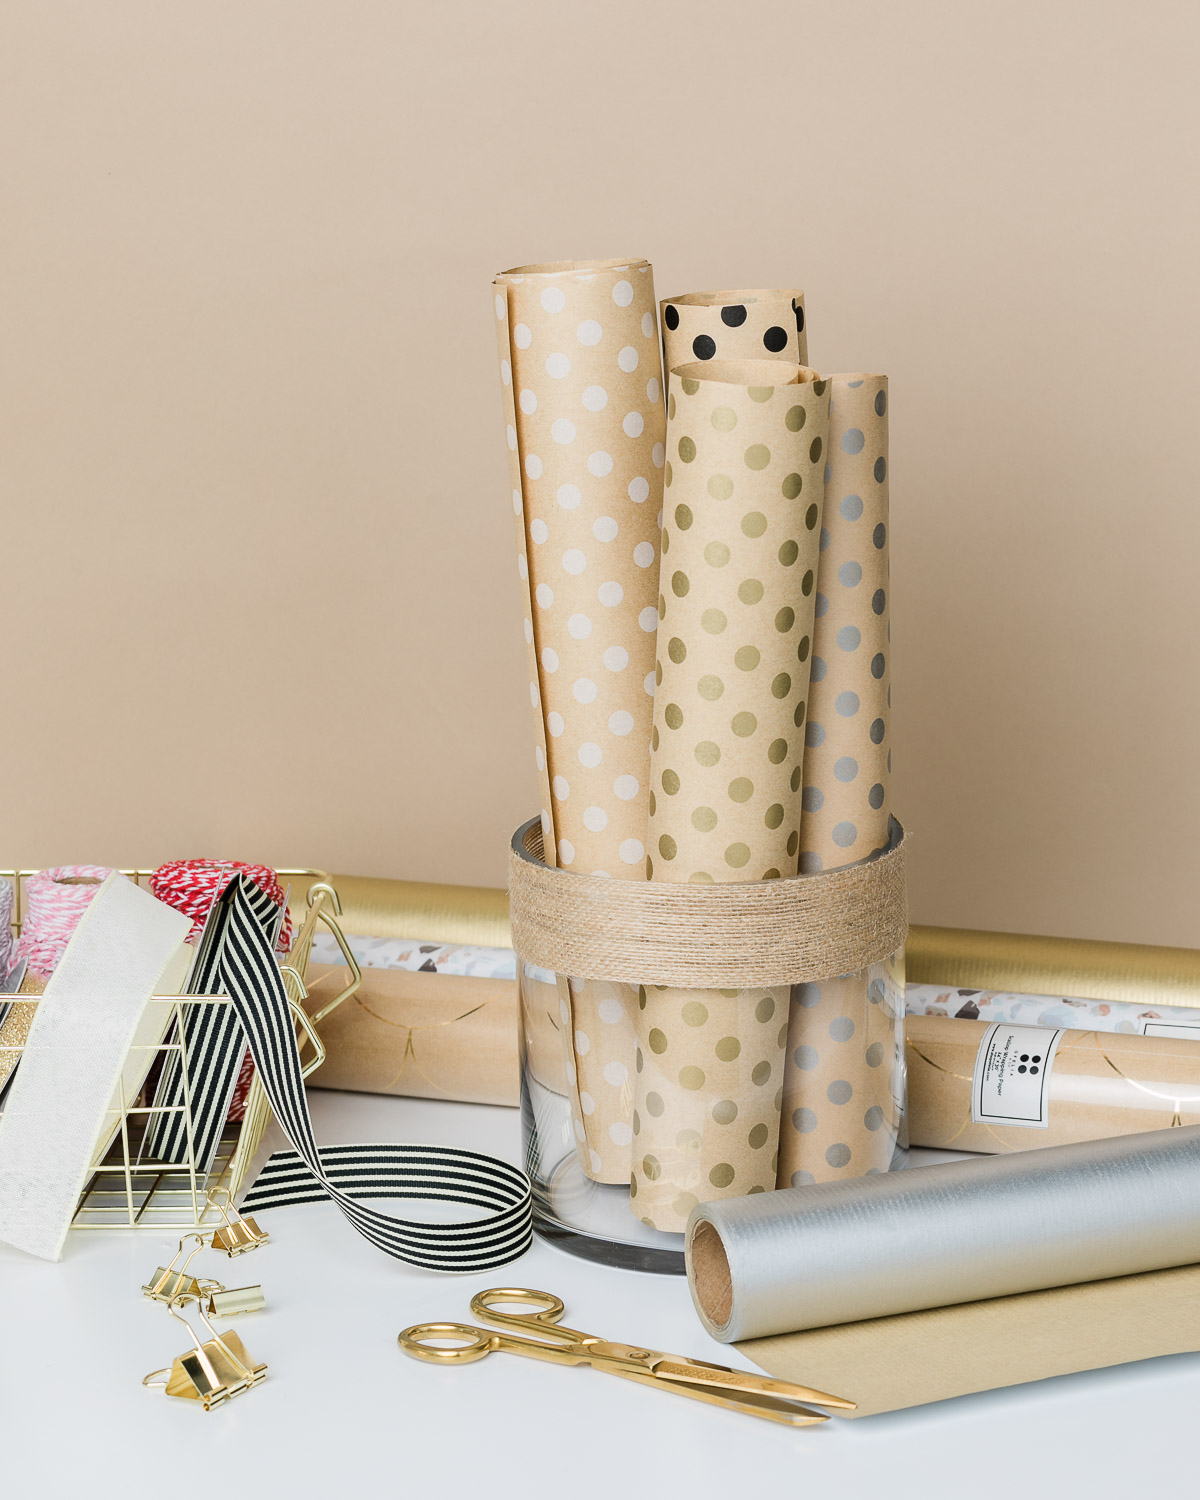 Lifestyle wrapping paper photography for Toronto business